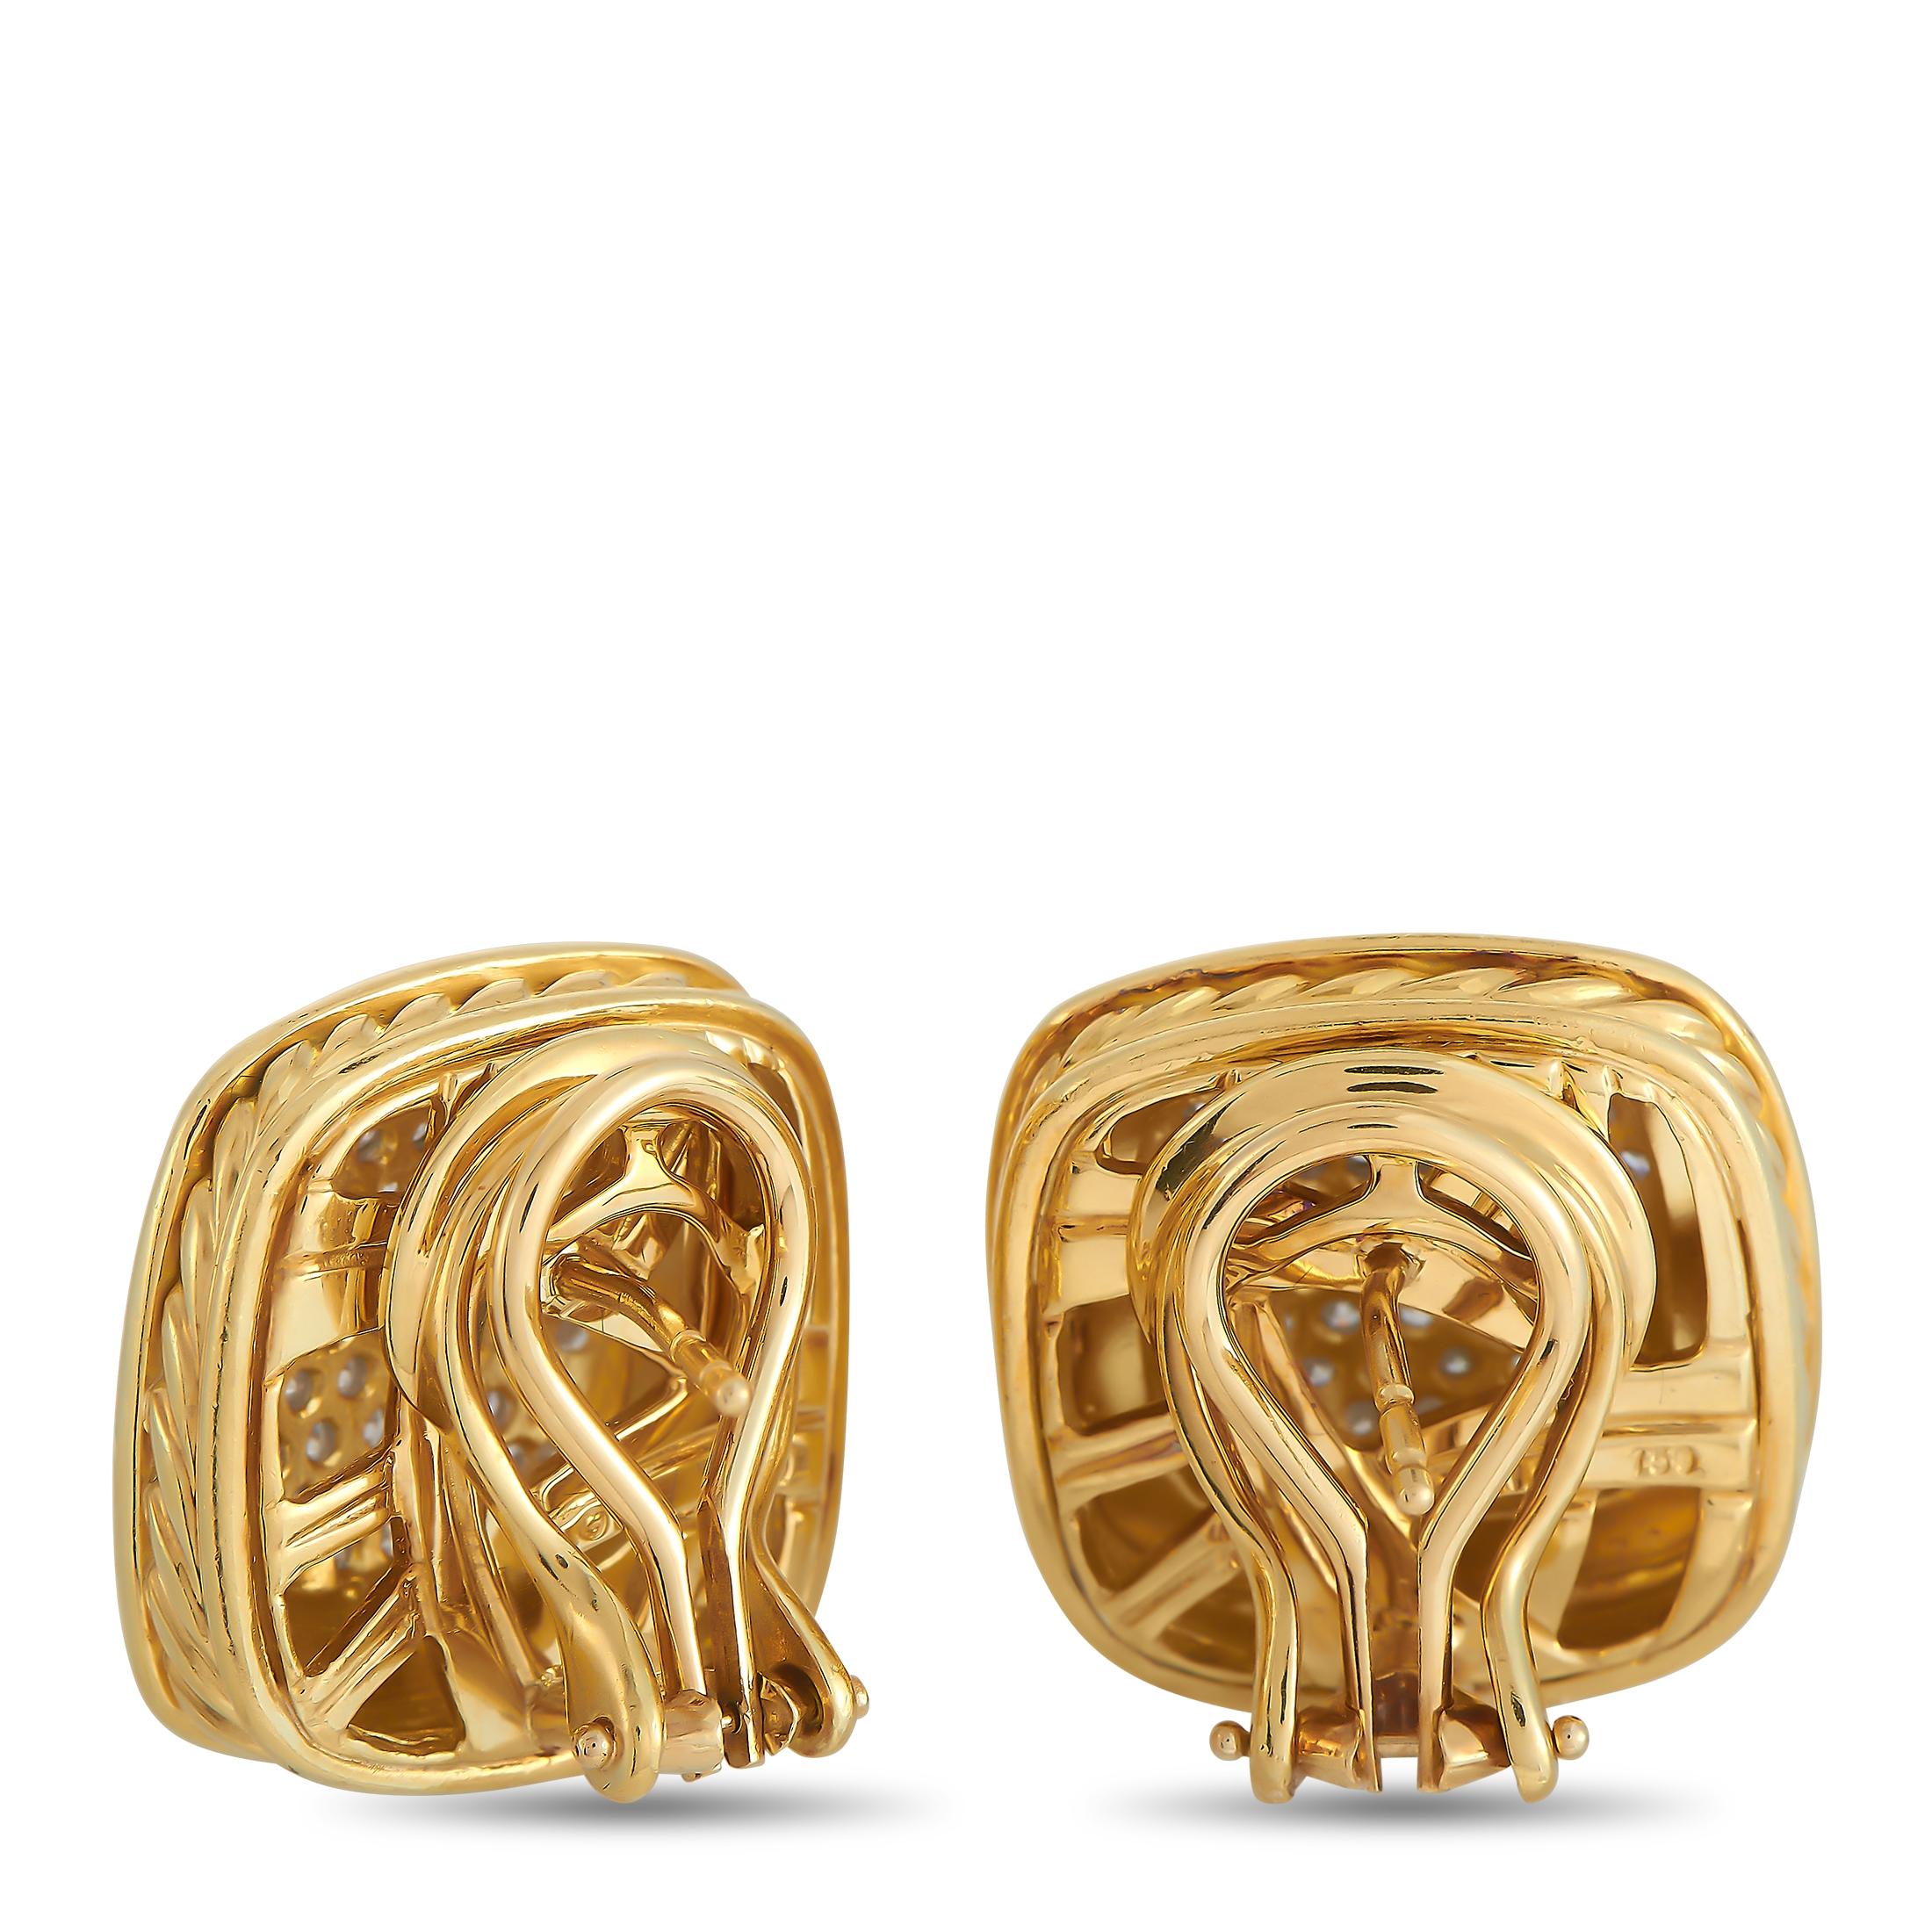 Make a scintillating statement in these elegant David Yurman Albion Earrings. The stunning square shape is only elevated by the opulent 18K yellow gold. At the center, an array of inset diamonds totaling 2.00 carats with F color and VVS clarity add